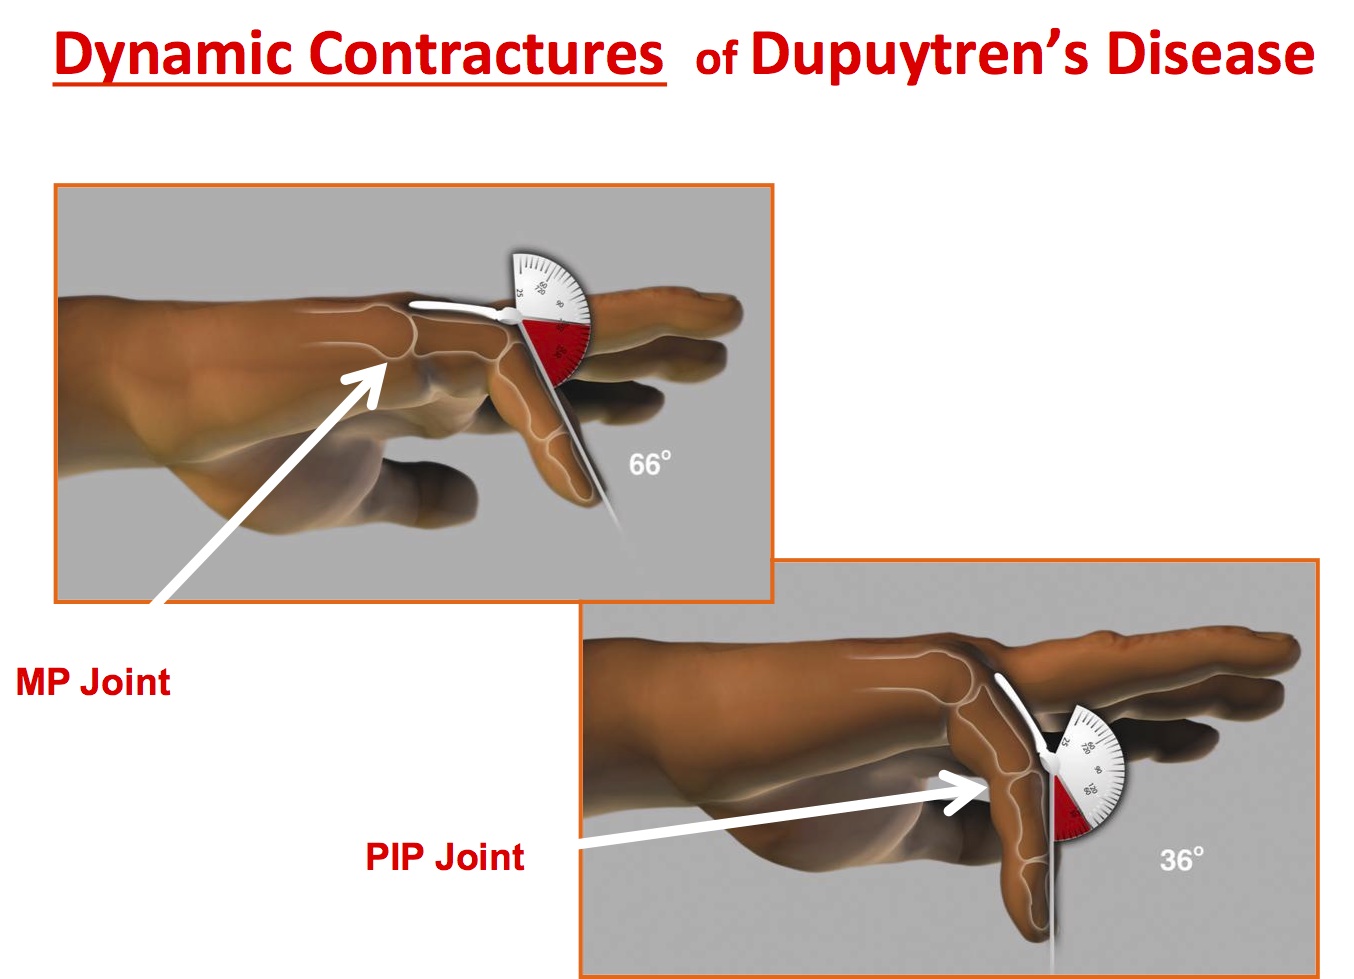 Dupuytren's Disease -Clinical signs -joint contracture measurements. Note central cords cross two joints therefore the position of one joint influences the measurement of the FC in the other joint.